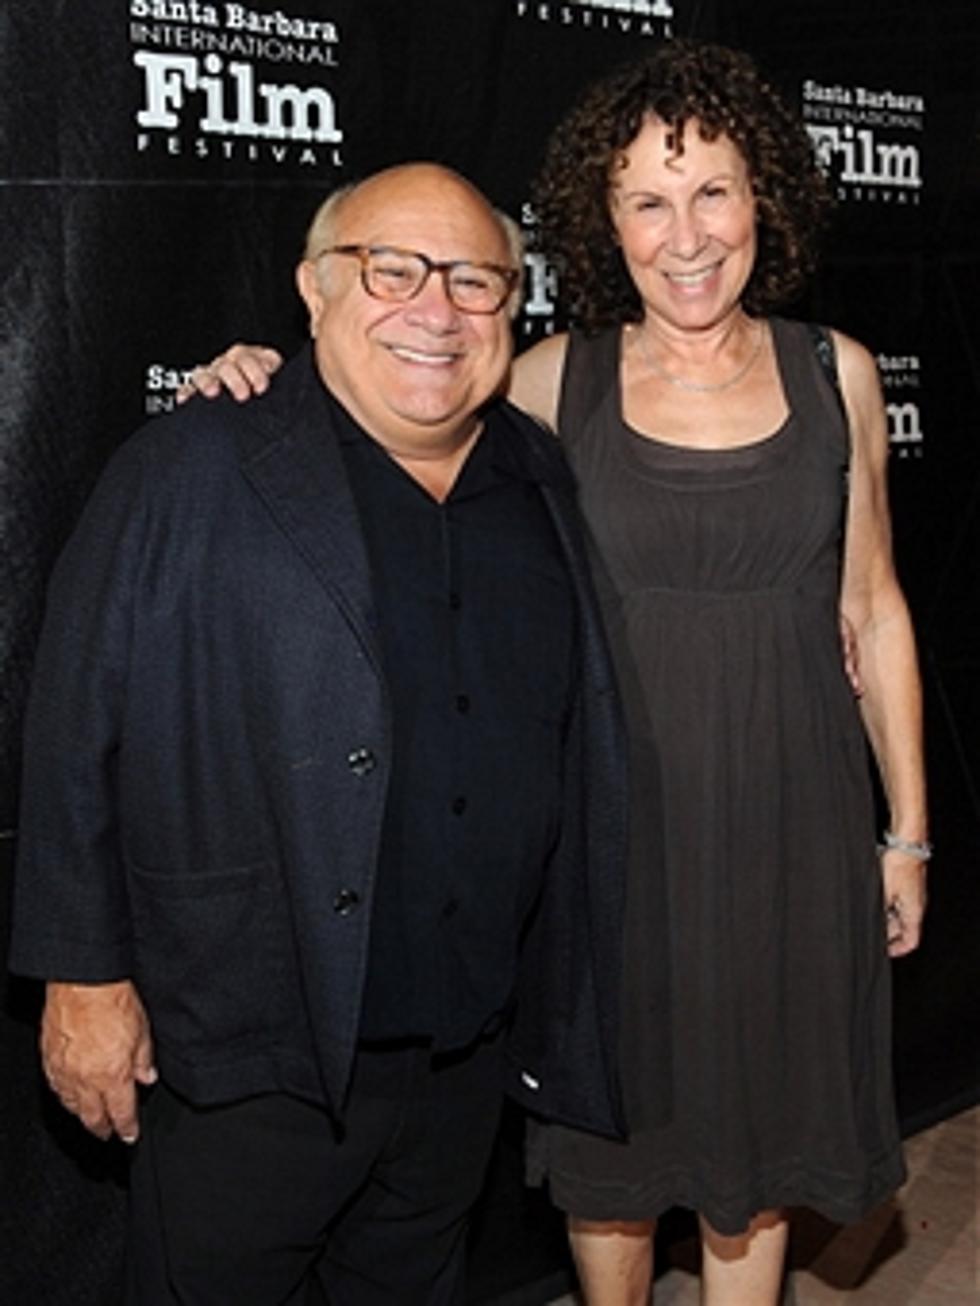 ‘Danny DeVito and Rhea Perlman’ Divorce After 30 Years